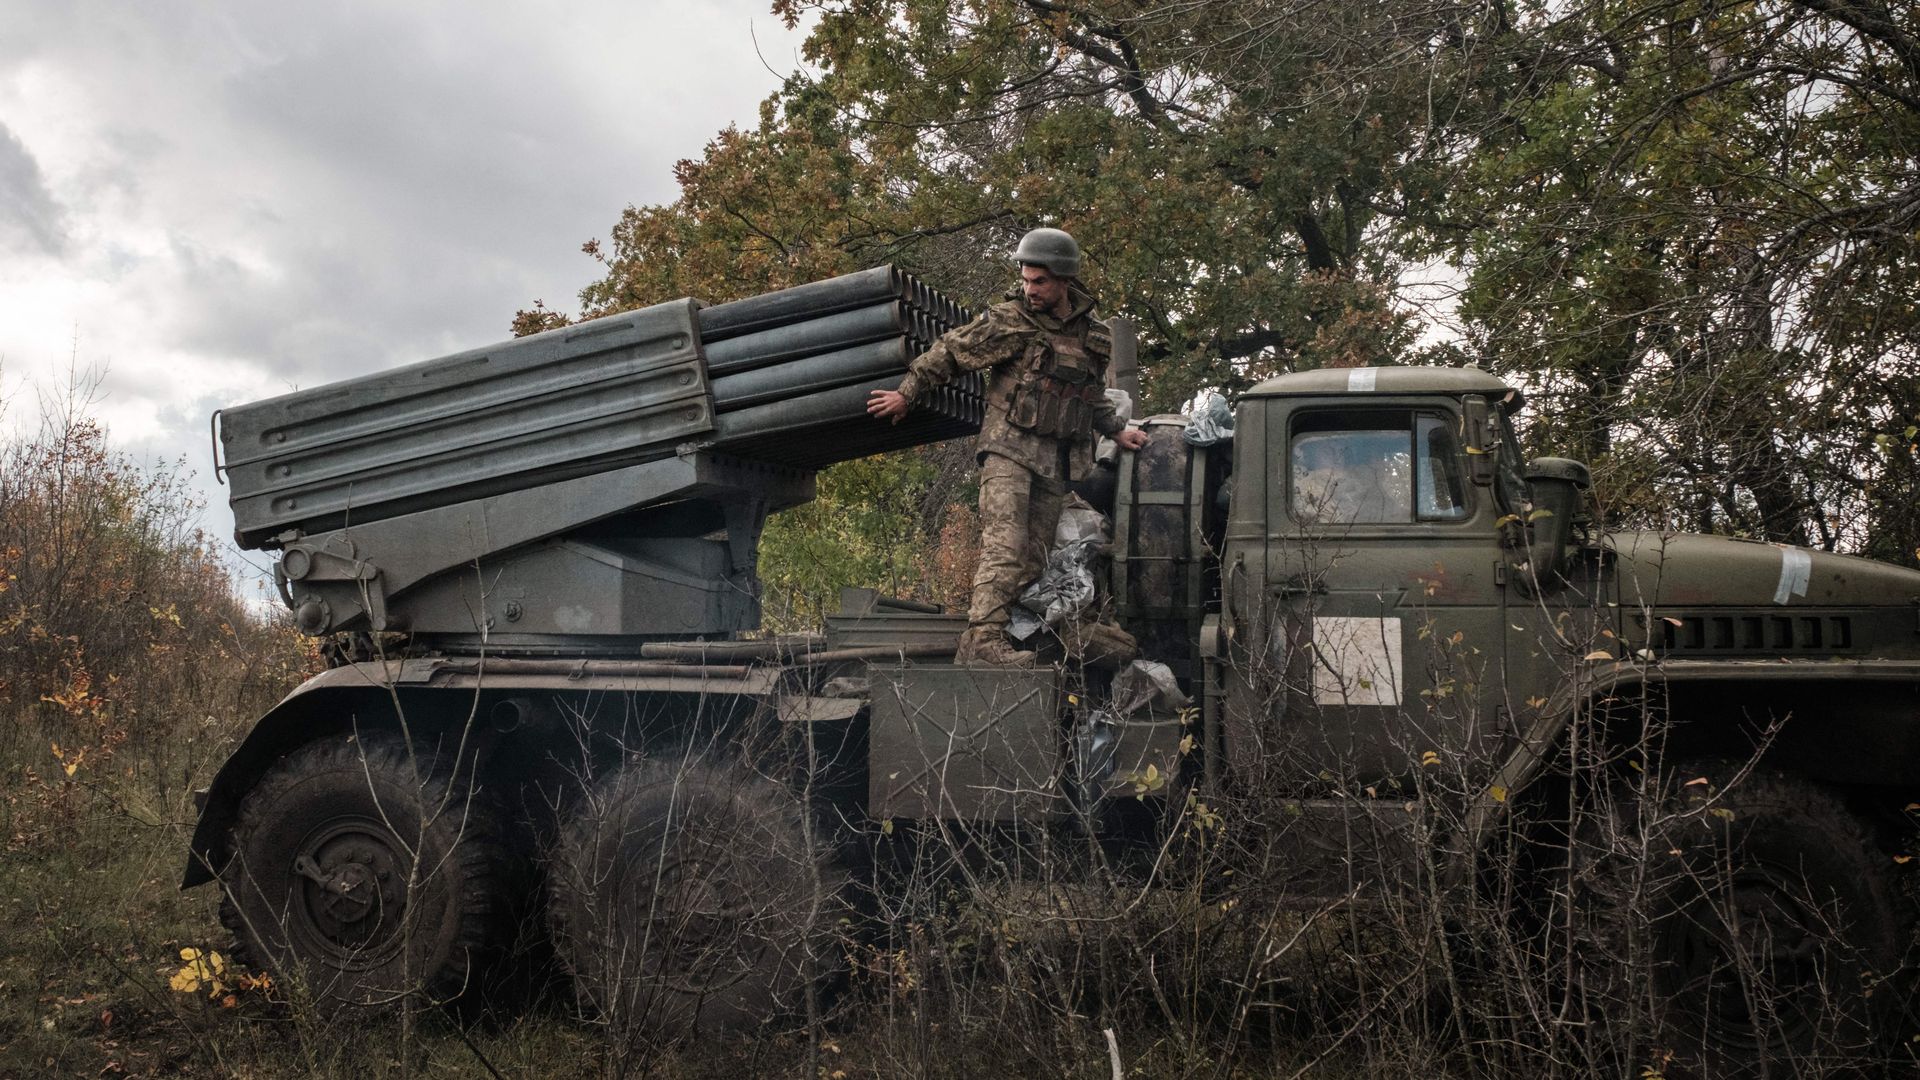 Ukrainian soldiers prepare to move their multiple rocket launcher